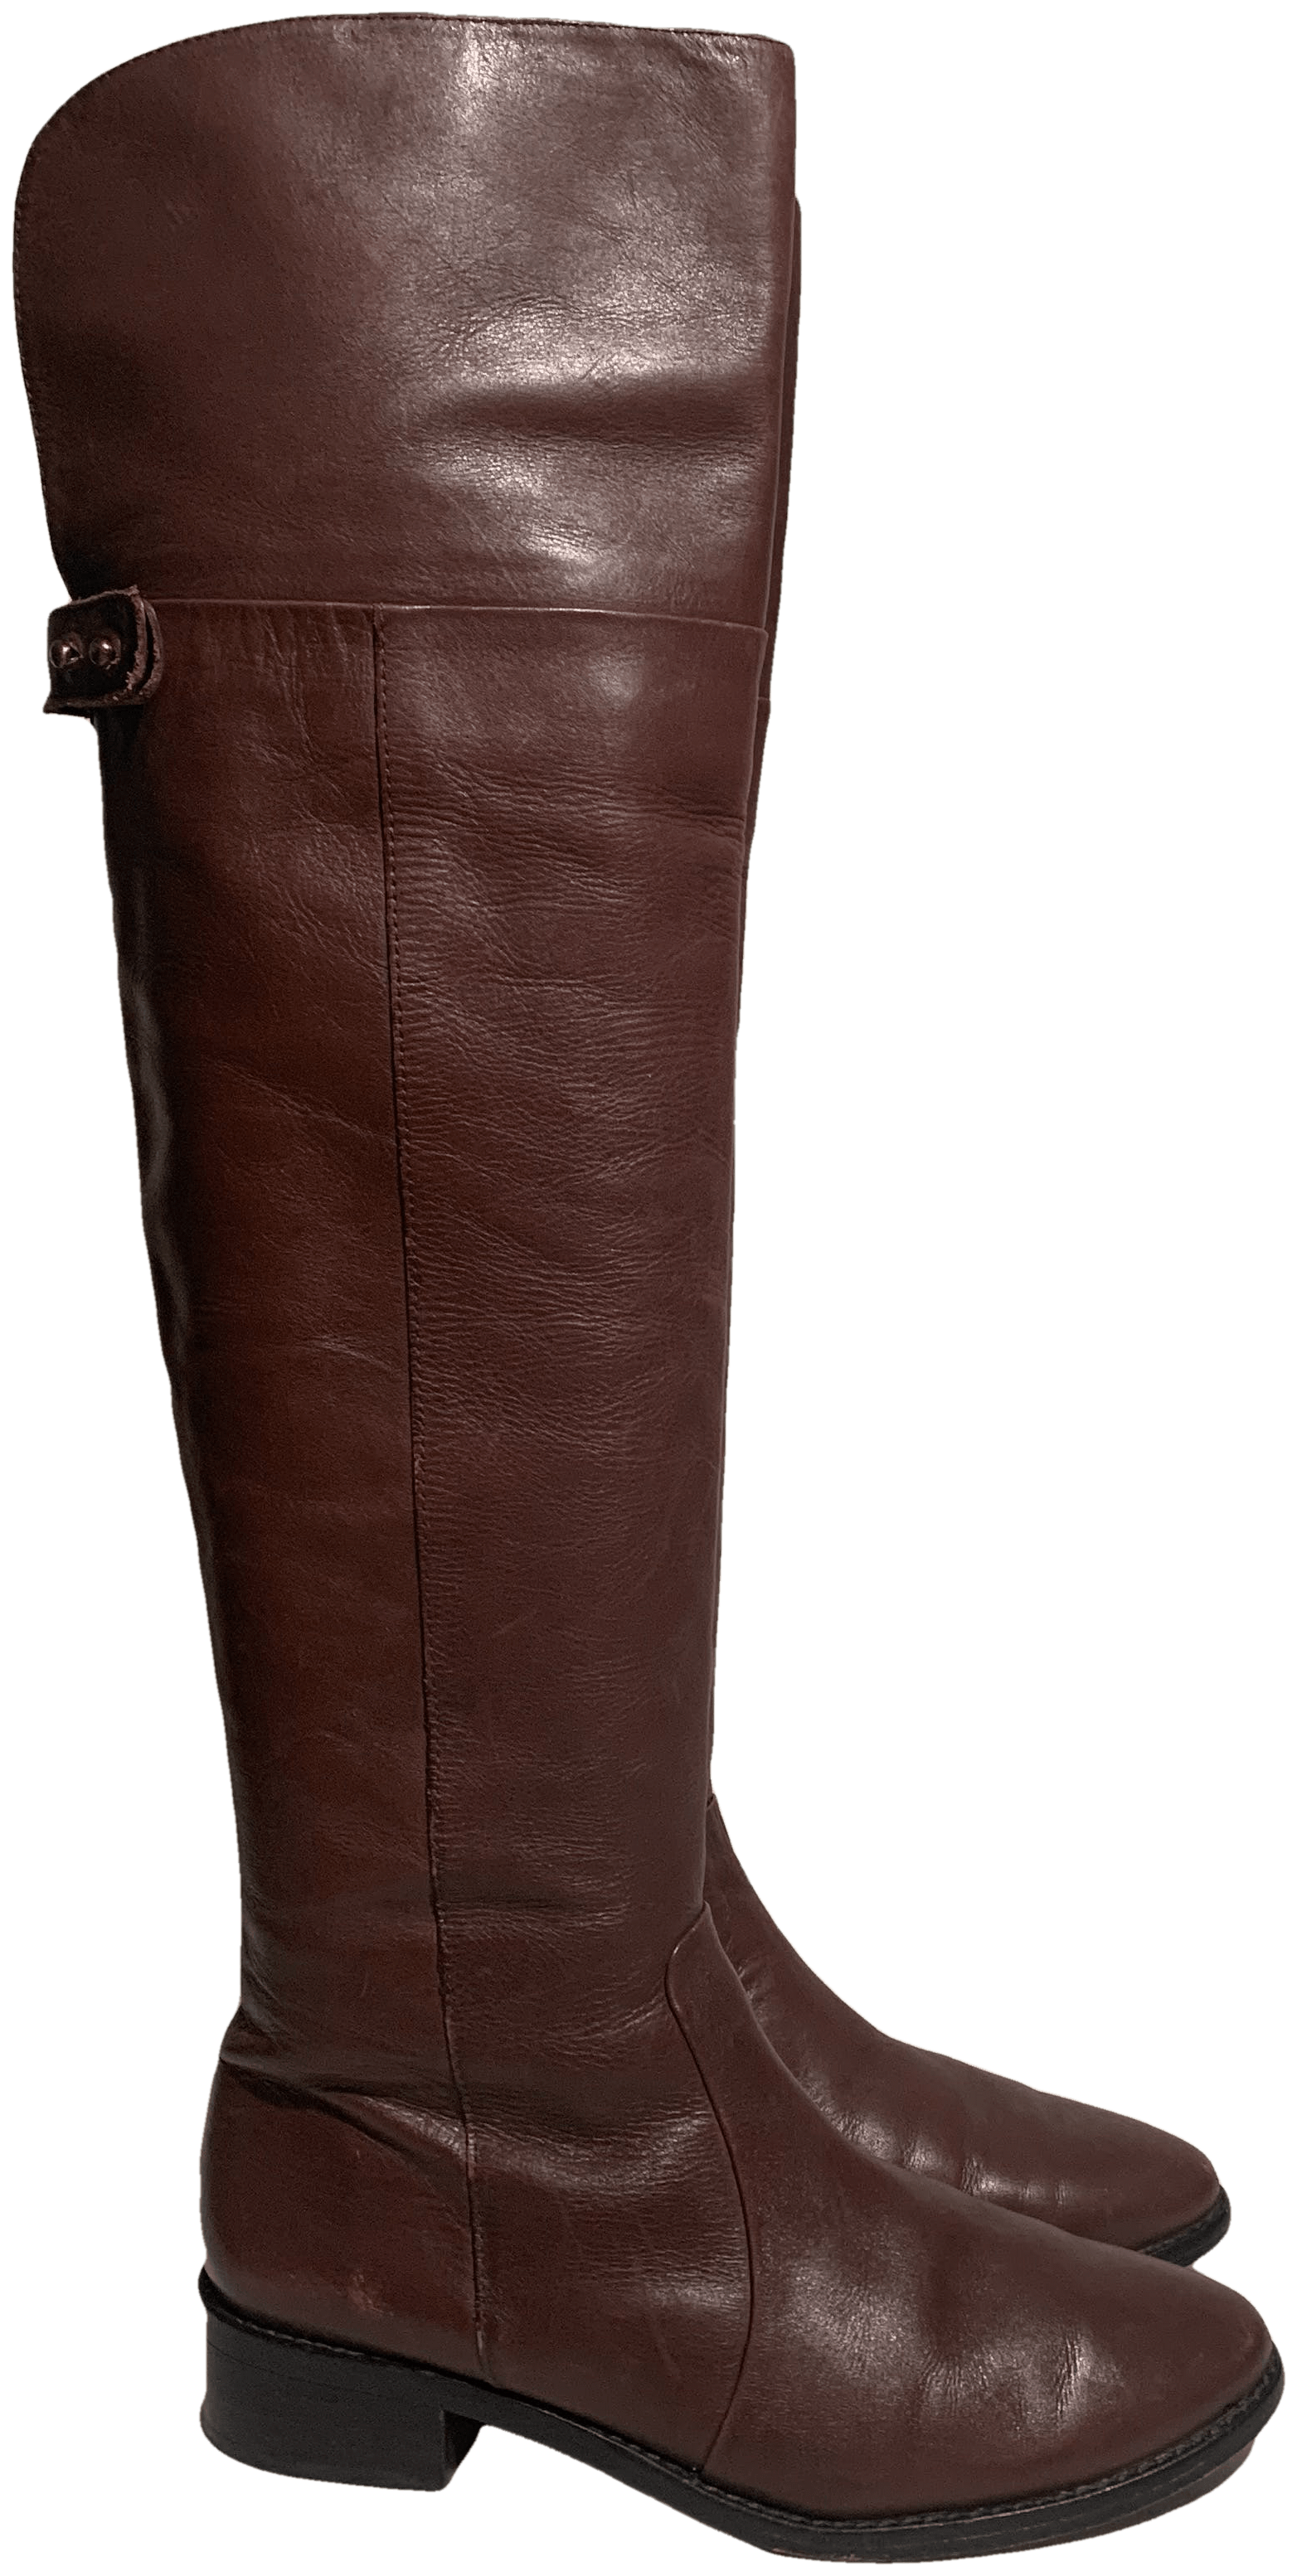 Knee Boots by BCBG Max Azria – Thrilling